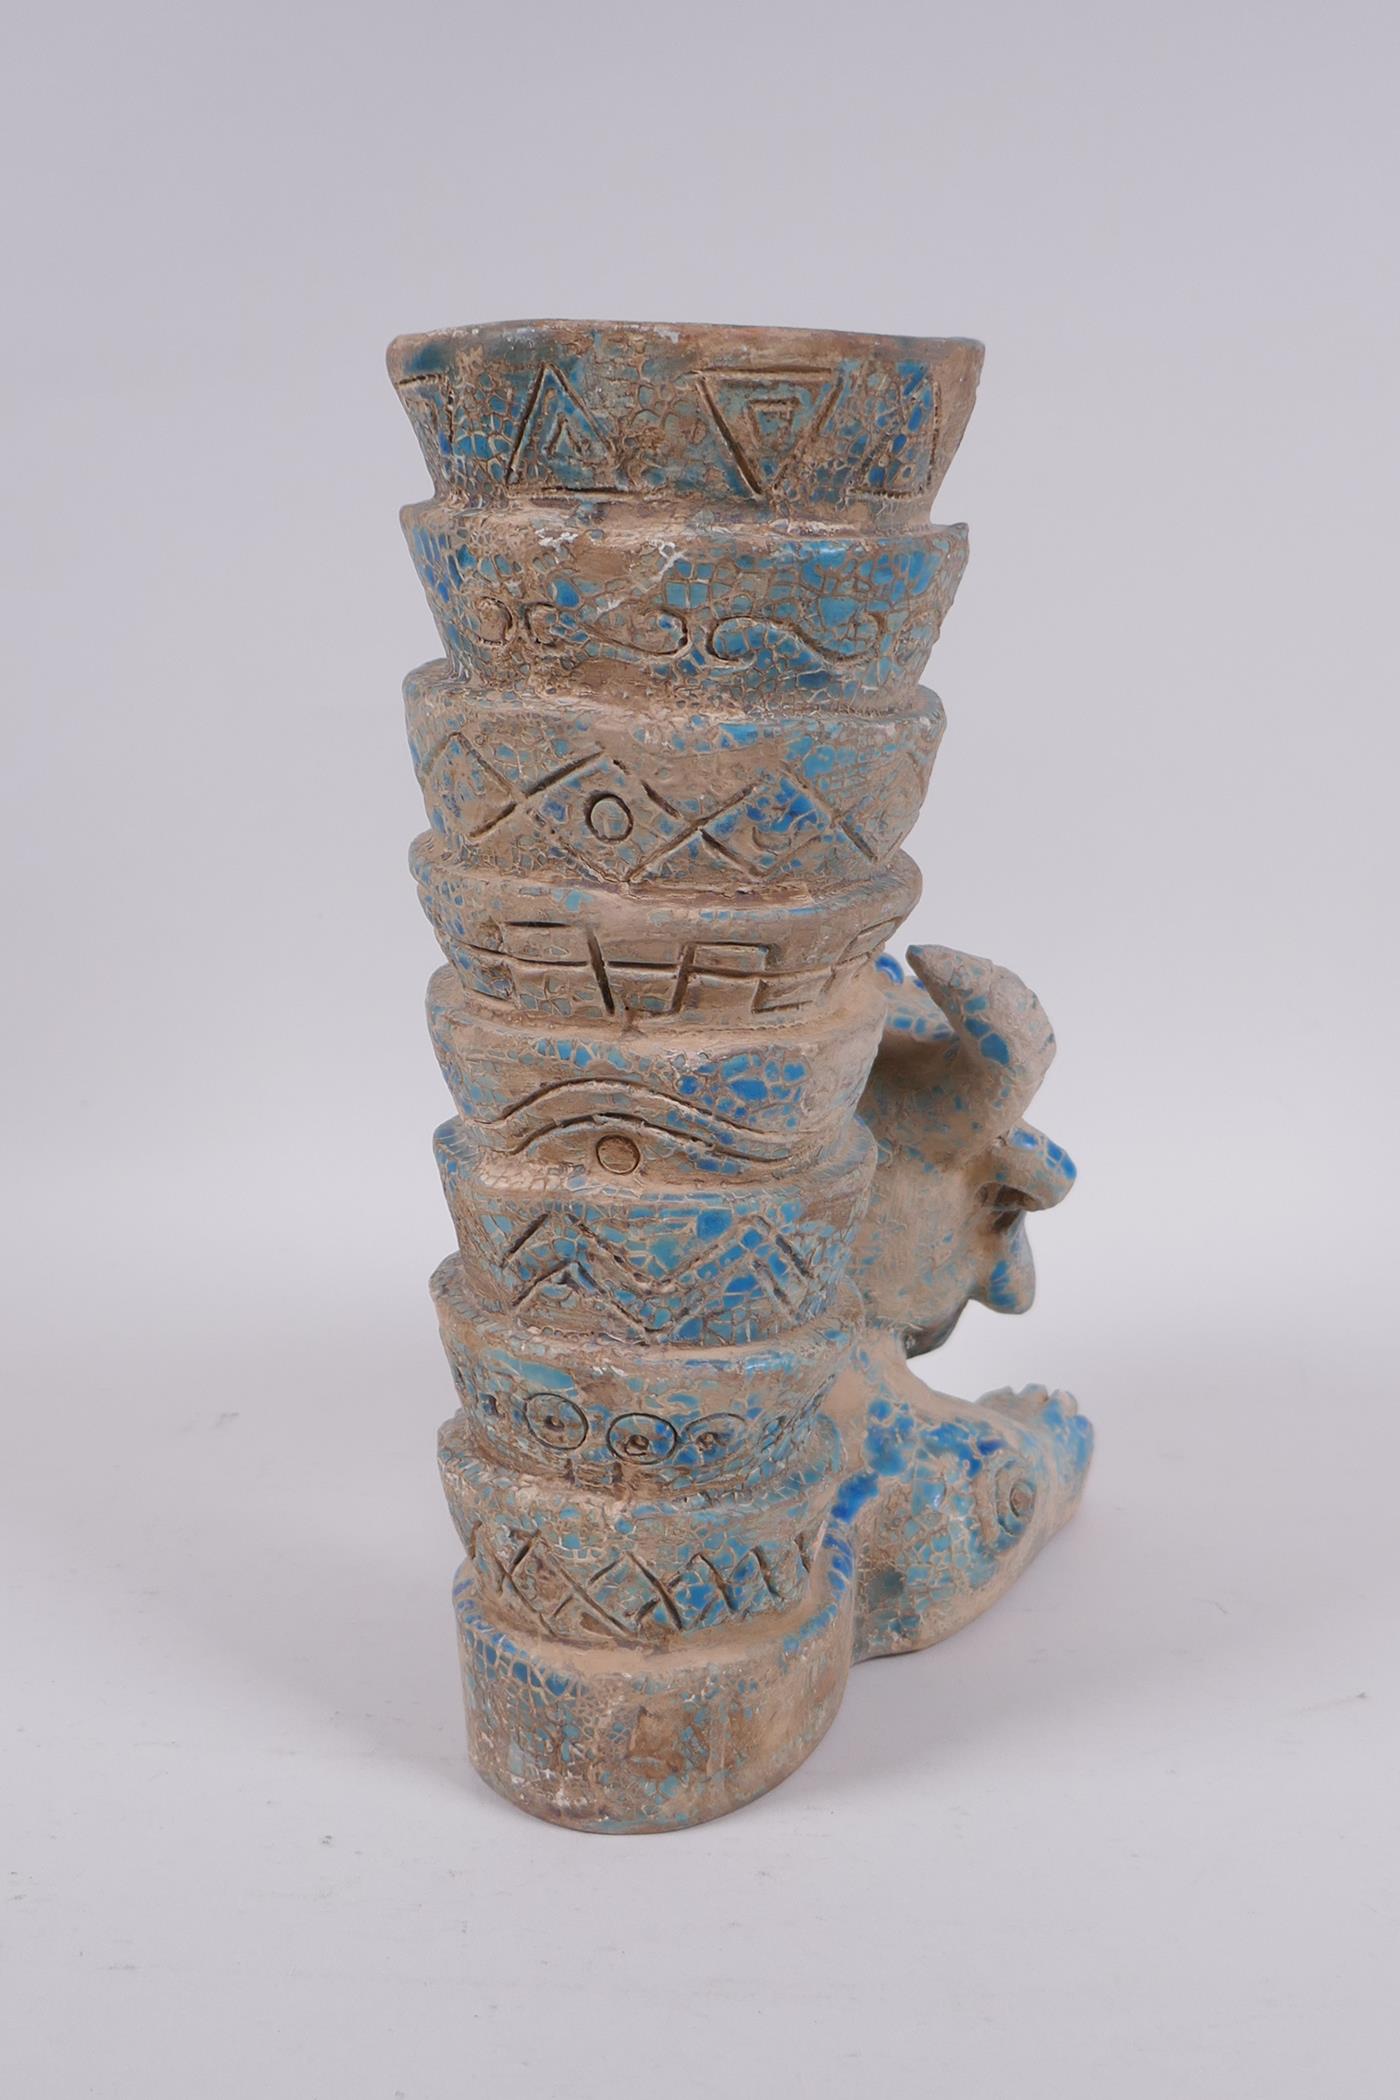 An Islamic earthenware mask vase with turquoise crackle glaze, 25cm high - Image 4 of 5